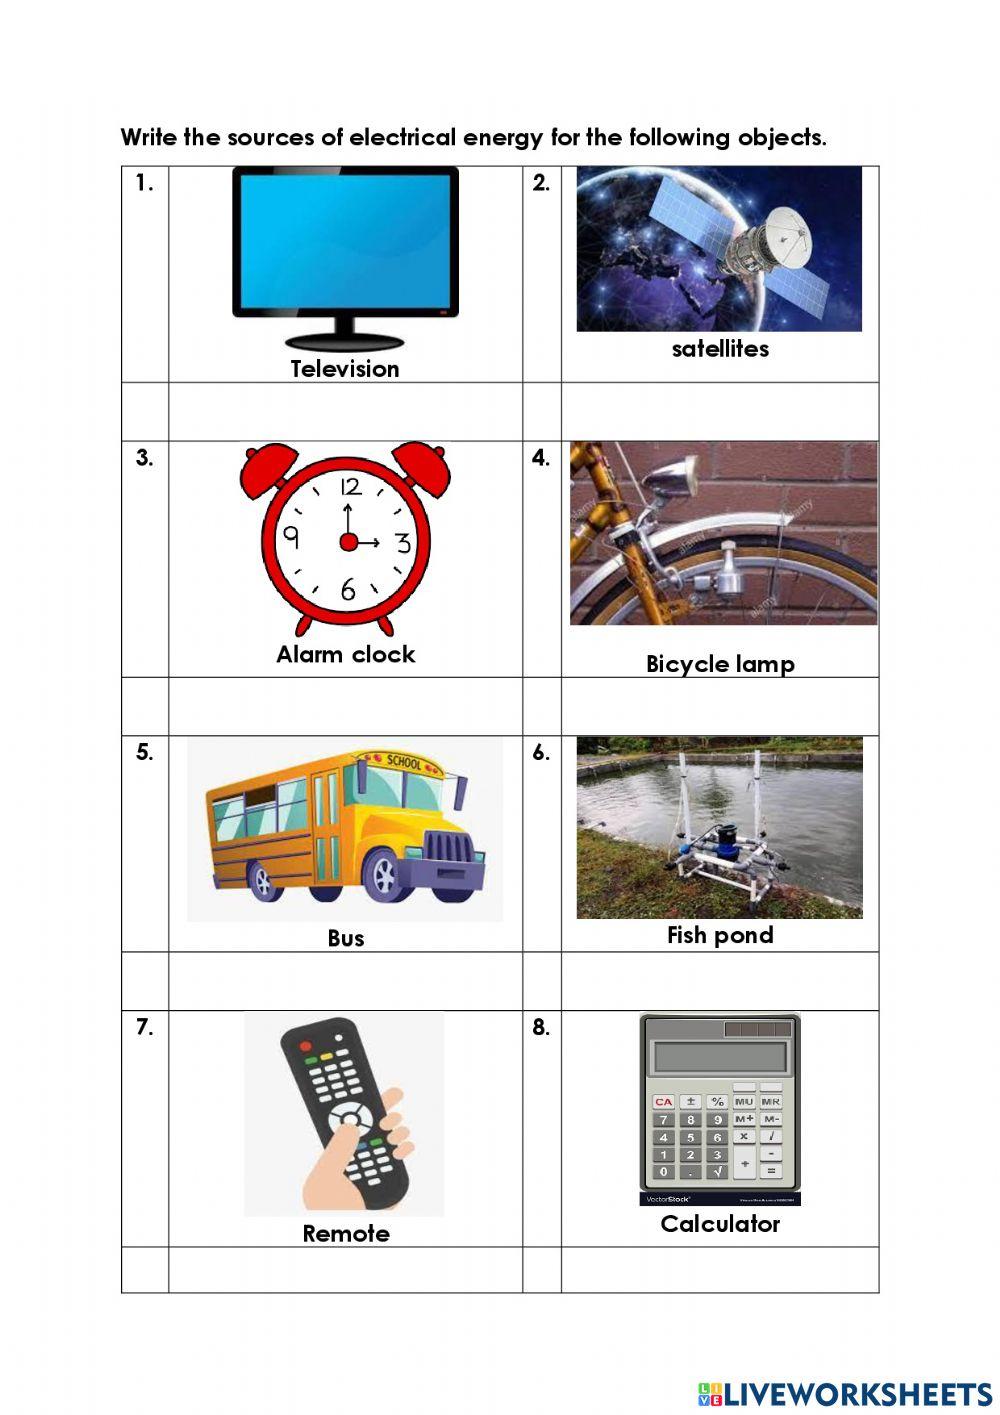 Sources of electrical energy